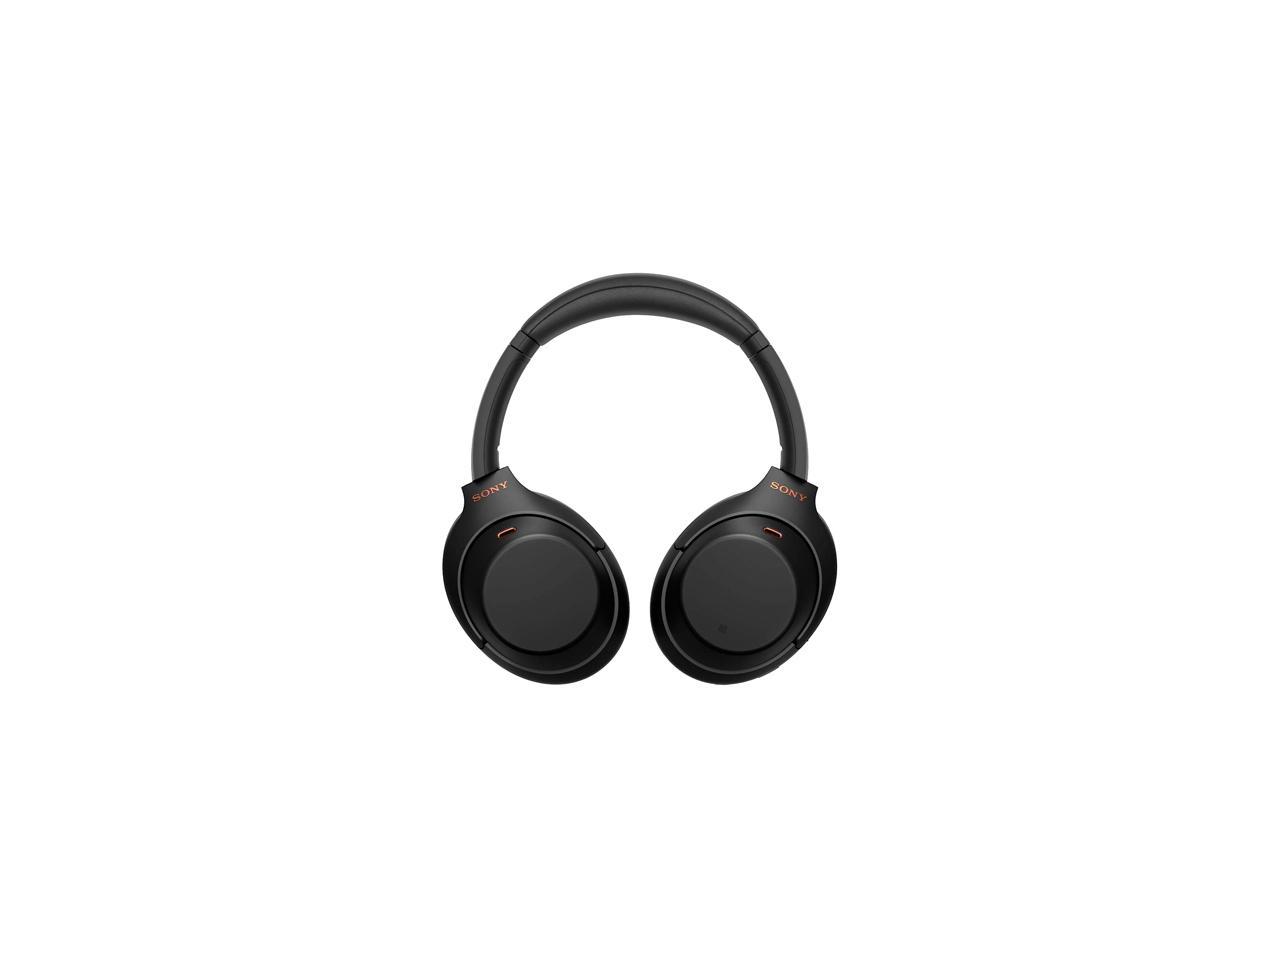 Sony WH-1000XM4 Wireless Noise-Cancelling Over-Ear Headphones (Black)